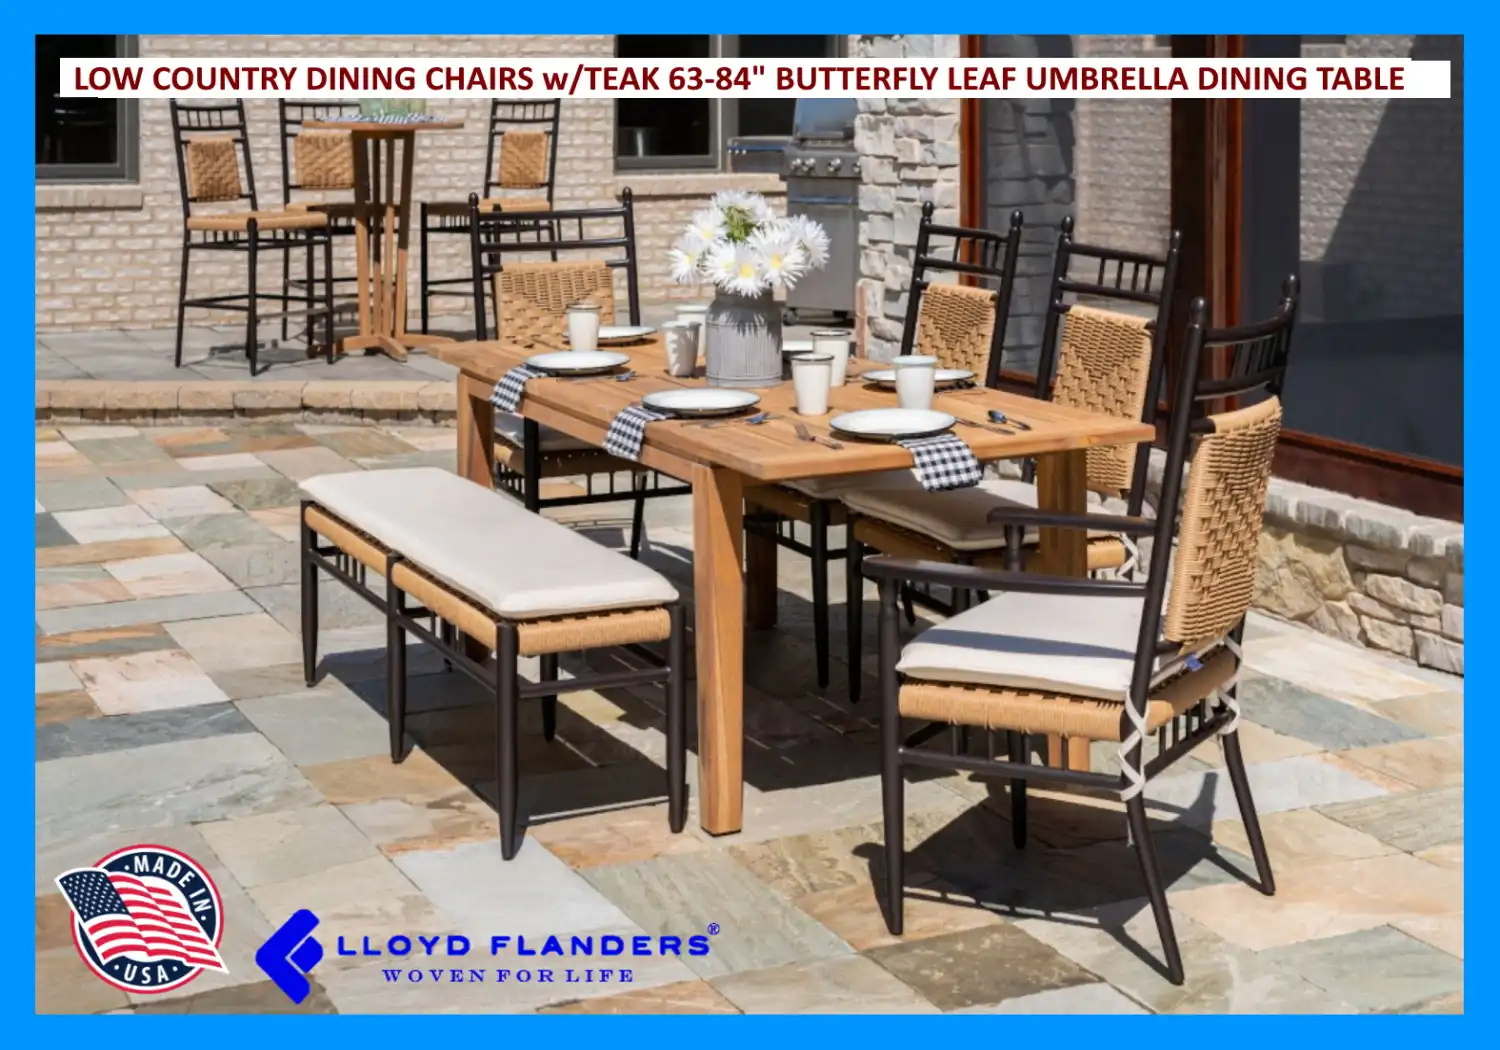 LOW COUNTRY DINING CHAIRS WITH TEAK 63"-84" BUTTERFLY LEAF UMBRELLA DINING TABLE